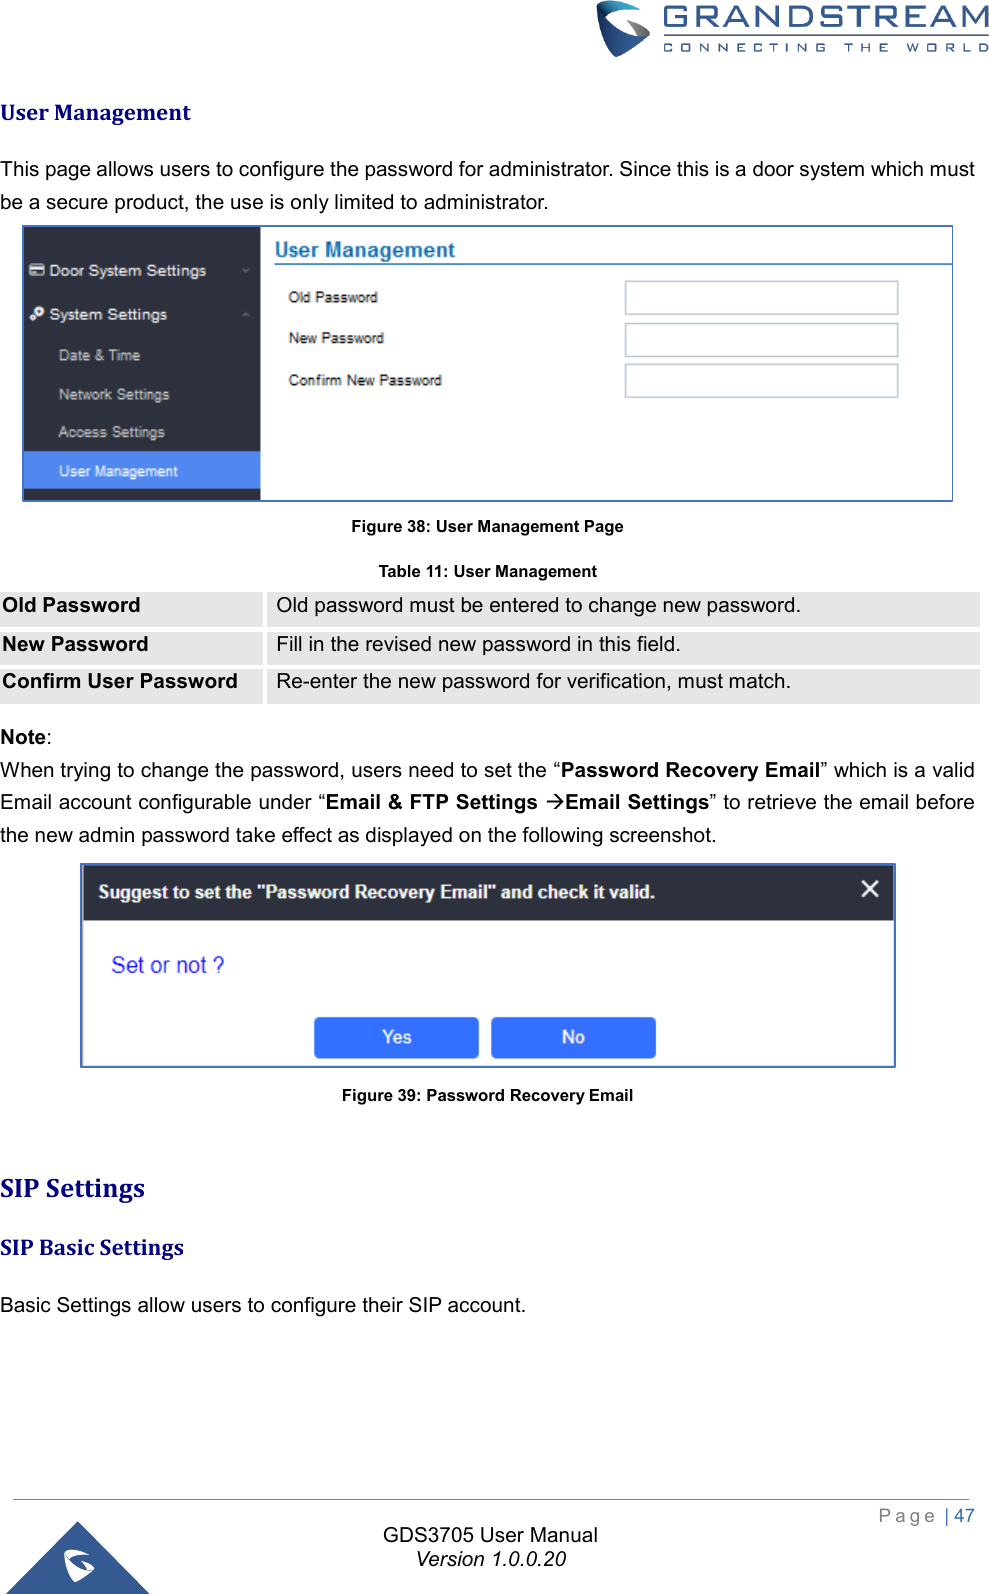                                                                         P a g e  | 47  GDS3705 User Manual Version 1.0.0.20 User Management This page allows users to configure the password for administrator. Since this is a door system which must be a secure product, the use is only limited to administrator.  Figure 38: User Management Page Table 11: User Management Old Password Old password must be entered to change new password. New Password Fill in the revised new password in this field. Confirm User Password Re-enter the new password for verification, must match. Note:  When trying to change the password, users need to set the “Password Recovery Email” which is a valid Email account configurable under “Email &amp; FTP Settings Email Settings” to retrieve the email before the new admin password take effect as displayed on the following screenshot.  Figure 39: Password Recovery Email  SIP Settings SIP Basic Settings Basic Settings allow users to configure their SIP account. 